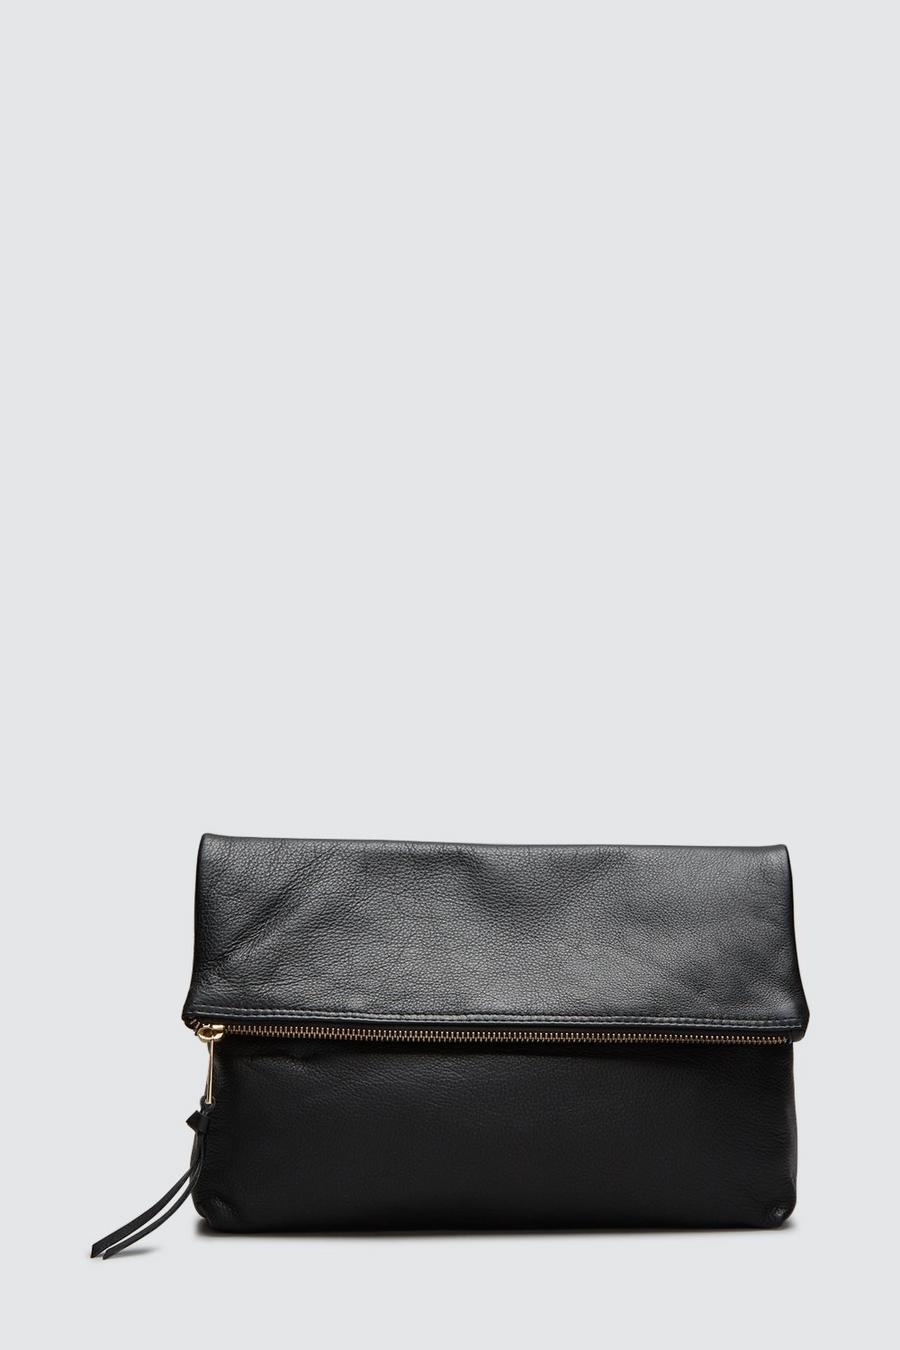 Real Leather Foldover Clutch